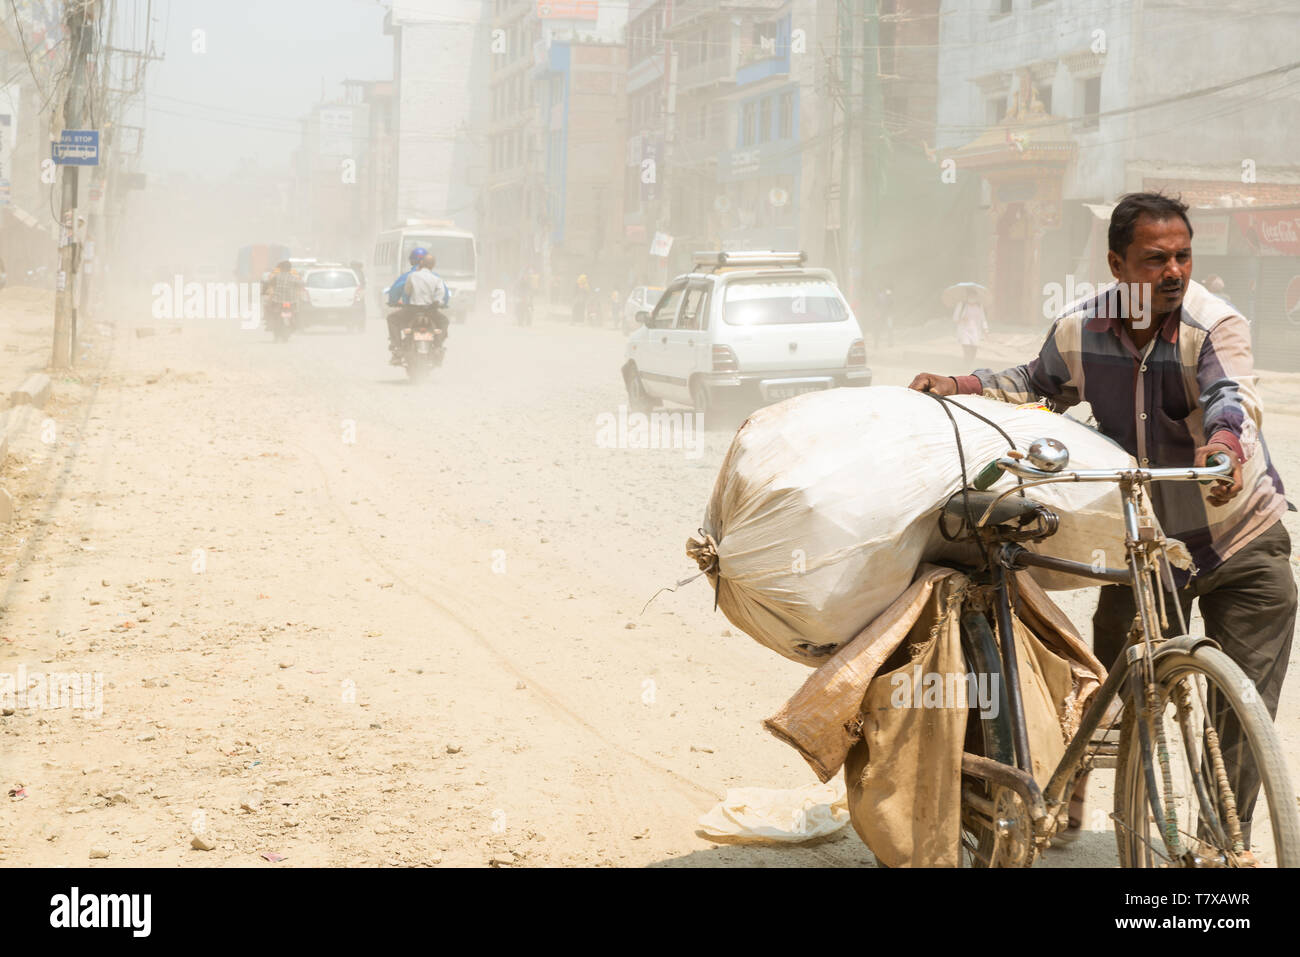 KATHMANDU, NEPAL - 9 MAY, 2019: Traffic on Boudha Road put dust in the air as the road is not blacktopped. It is on ongoing issue for the area's resid Stock Photo